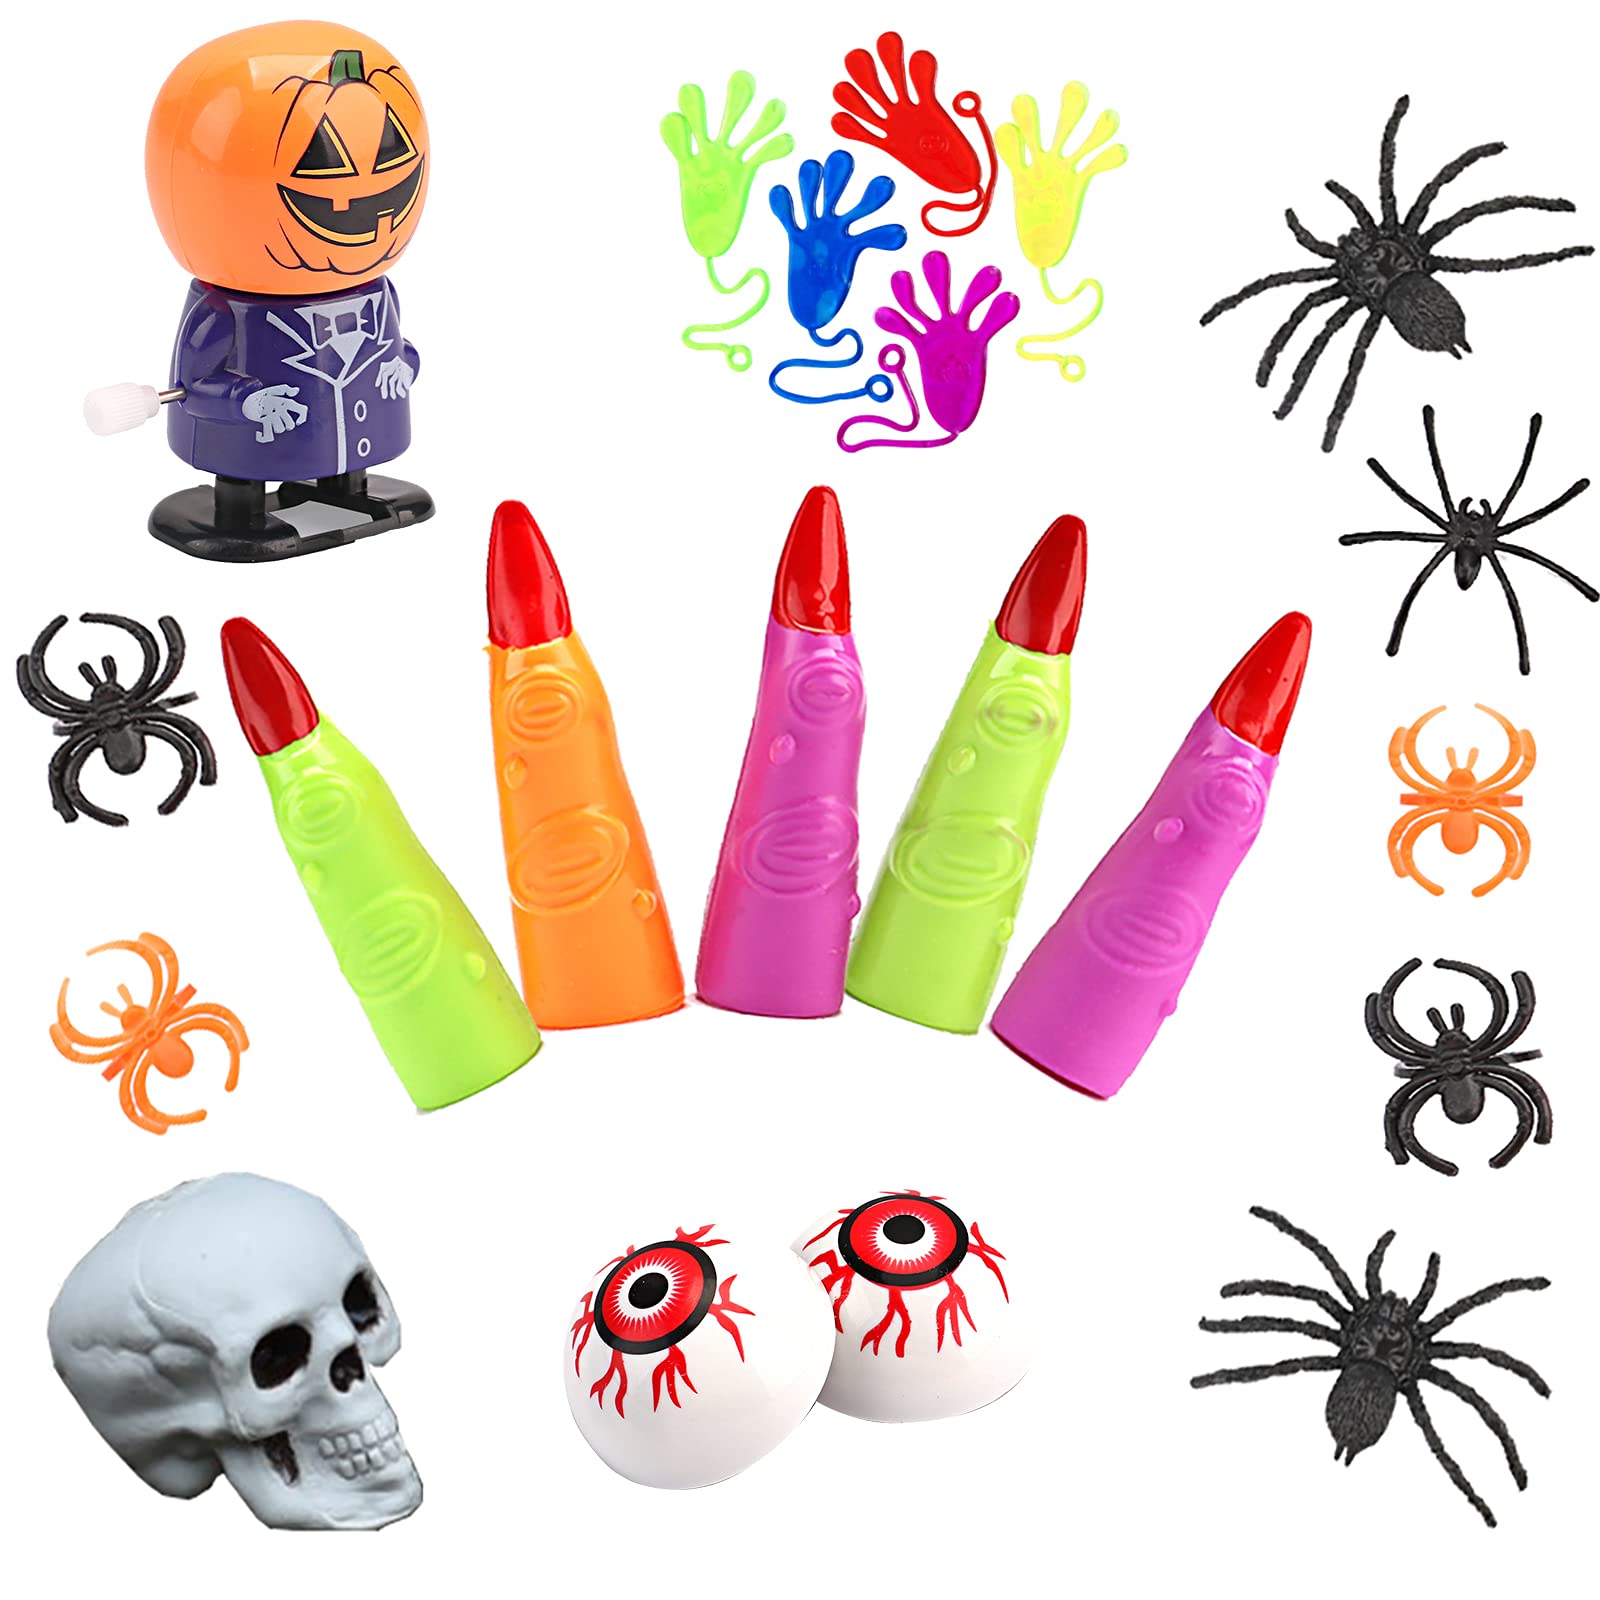 Halloween Party Favors - Perfect Assortment of Halloween Toys for Kids, Great Goodie Bag Fillers, School Classroom Rewards, Halloween Prizes to the Trick-or-Treaters(28 types of the toy, 135 Pcs)